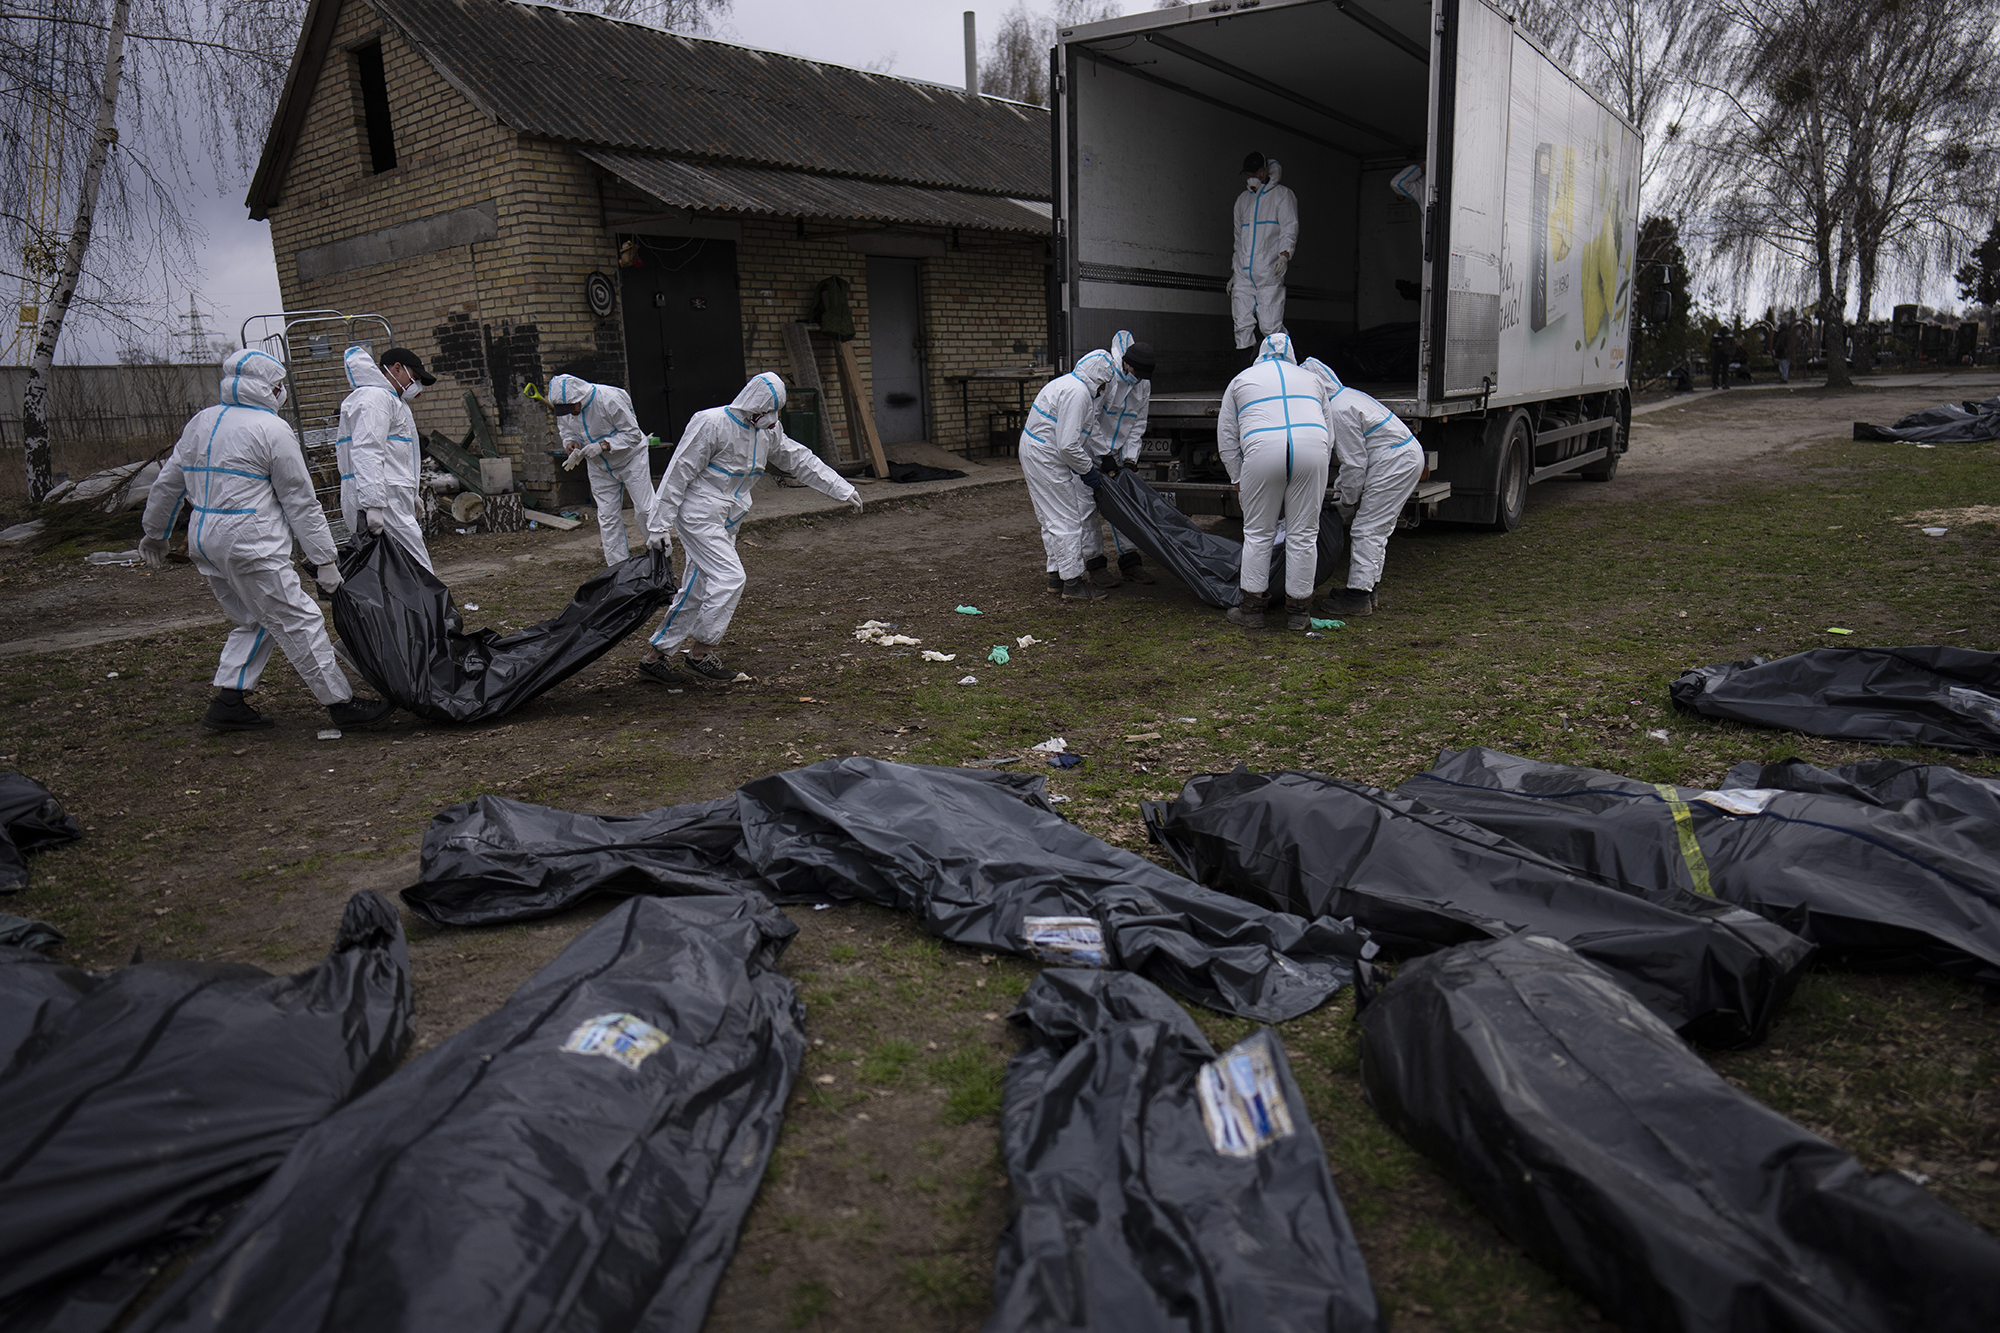 Volunteers load bodies of civilians killed in Bucha onto a truck to be taken to a morgue for investigation, in Bucha, Ukraine, on April 12 2022.